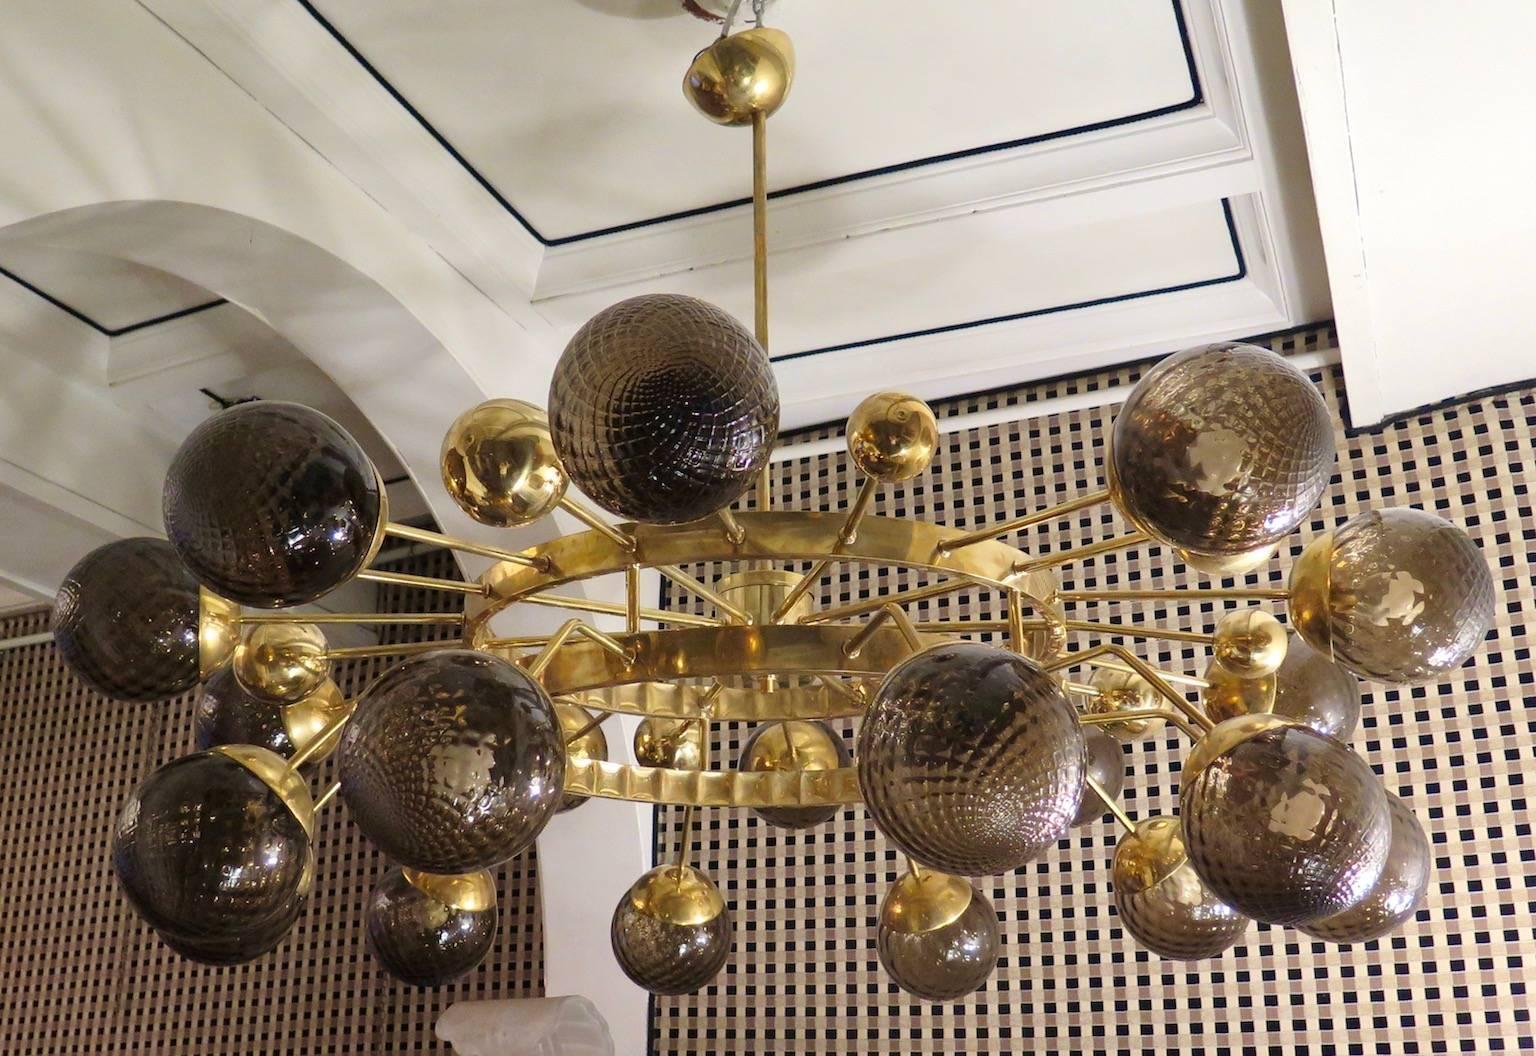 Particular circular sputnik, with brass structure and Murano glass spheres. It looks like a system of planets that gravitate circularly.

Chandelier with all brass structure, and amber colored glass spheres. A double brass structure of round shape,